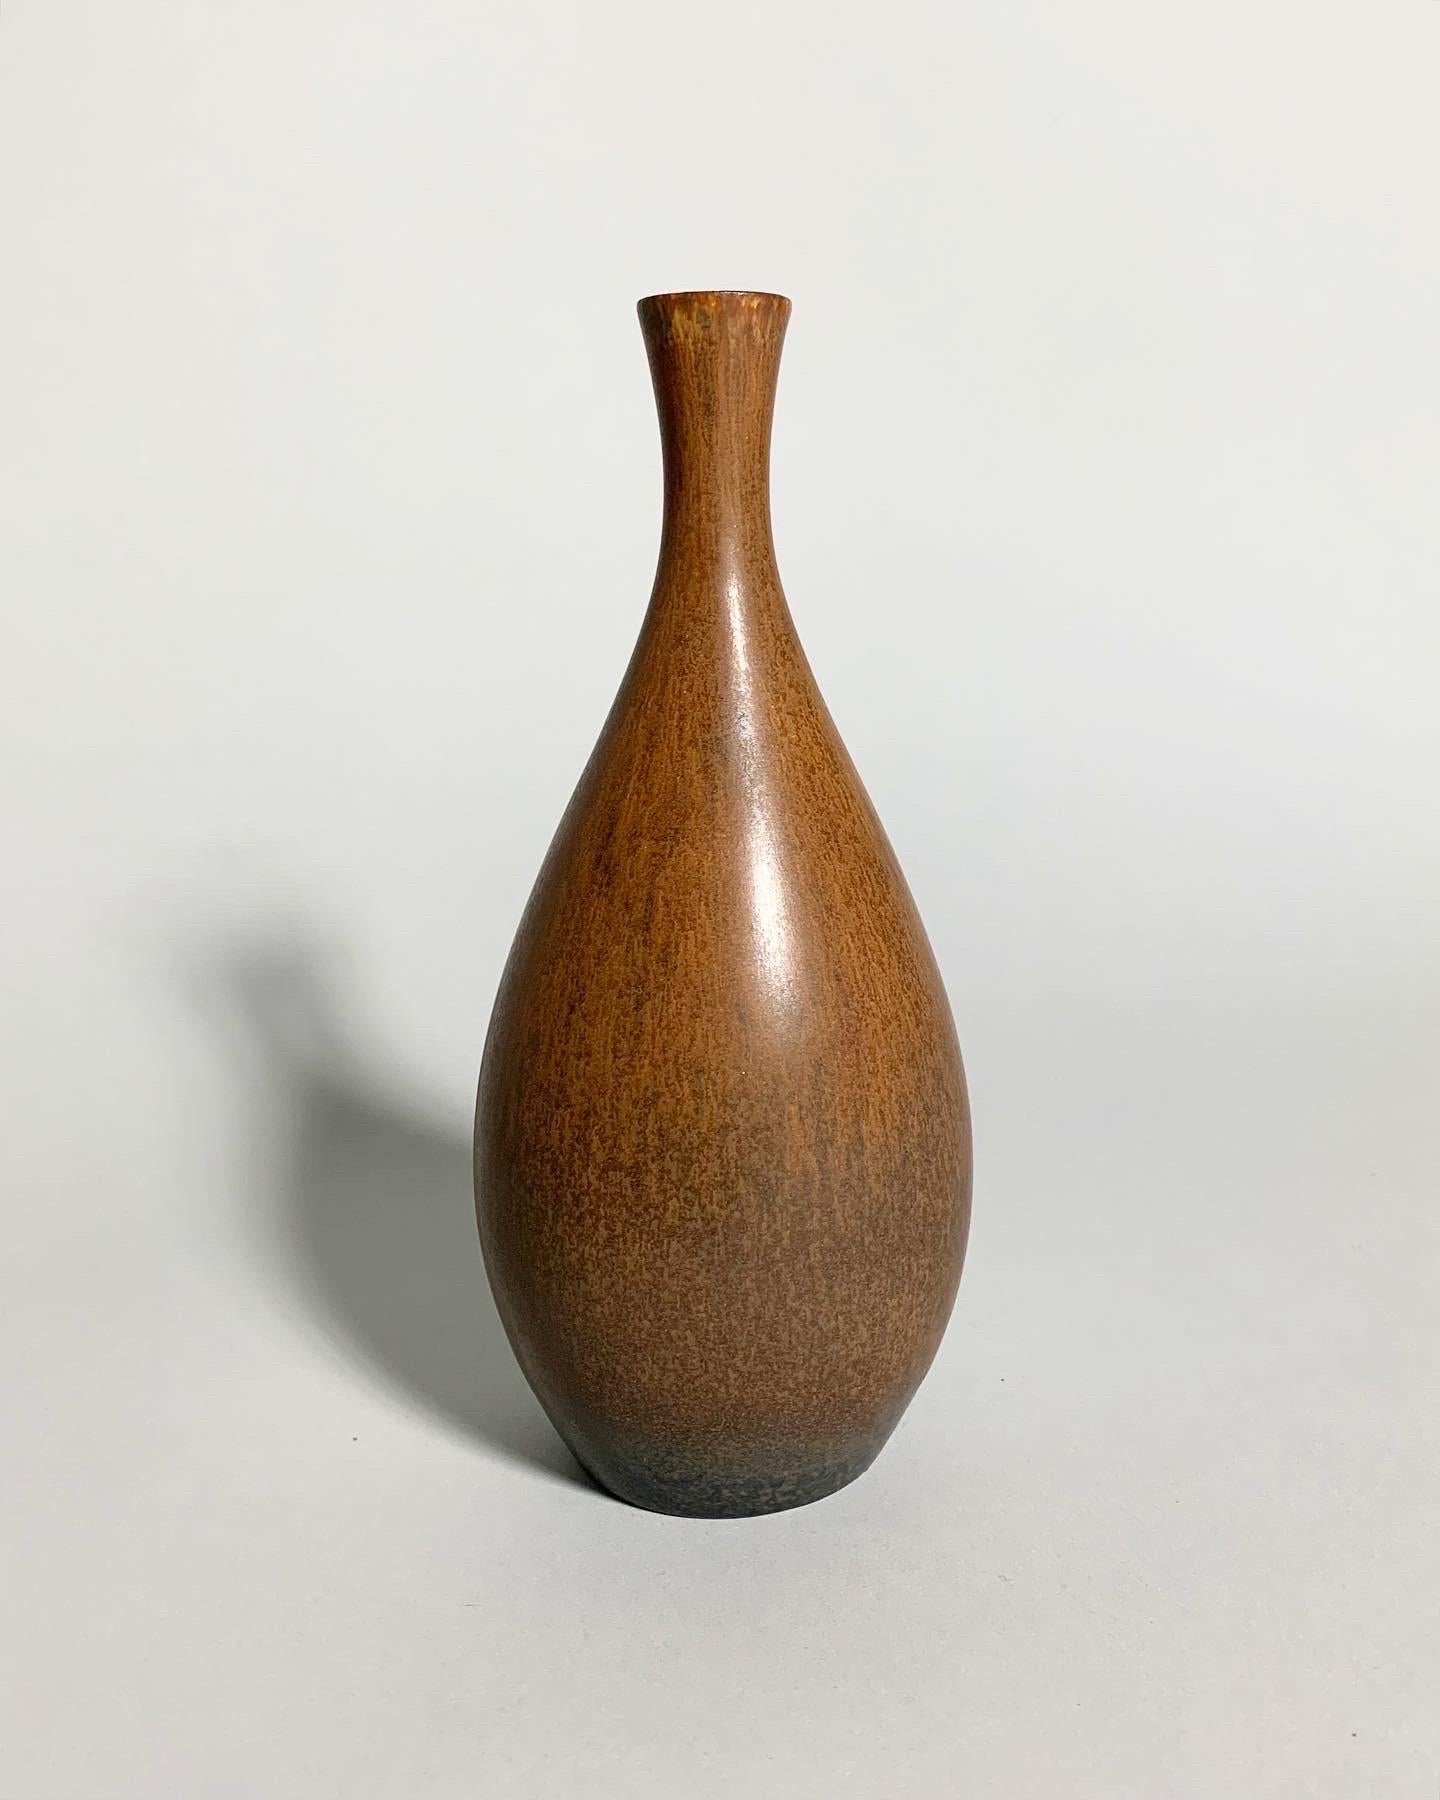 Carl Harry-Stalhåne stoneware vase, first quality sorting, hand-turned at Rörstrand factory in Sweden in the 1950s.

Beautiful hare‘s fur glaze in reddish brown tones, darkening at the base. Great condition!

Measures: height: 19 cm
Diameter: 8